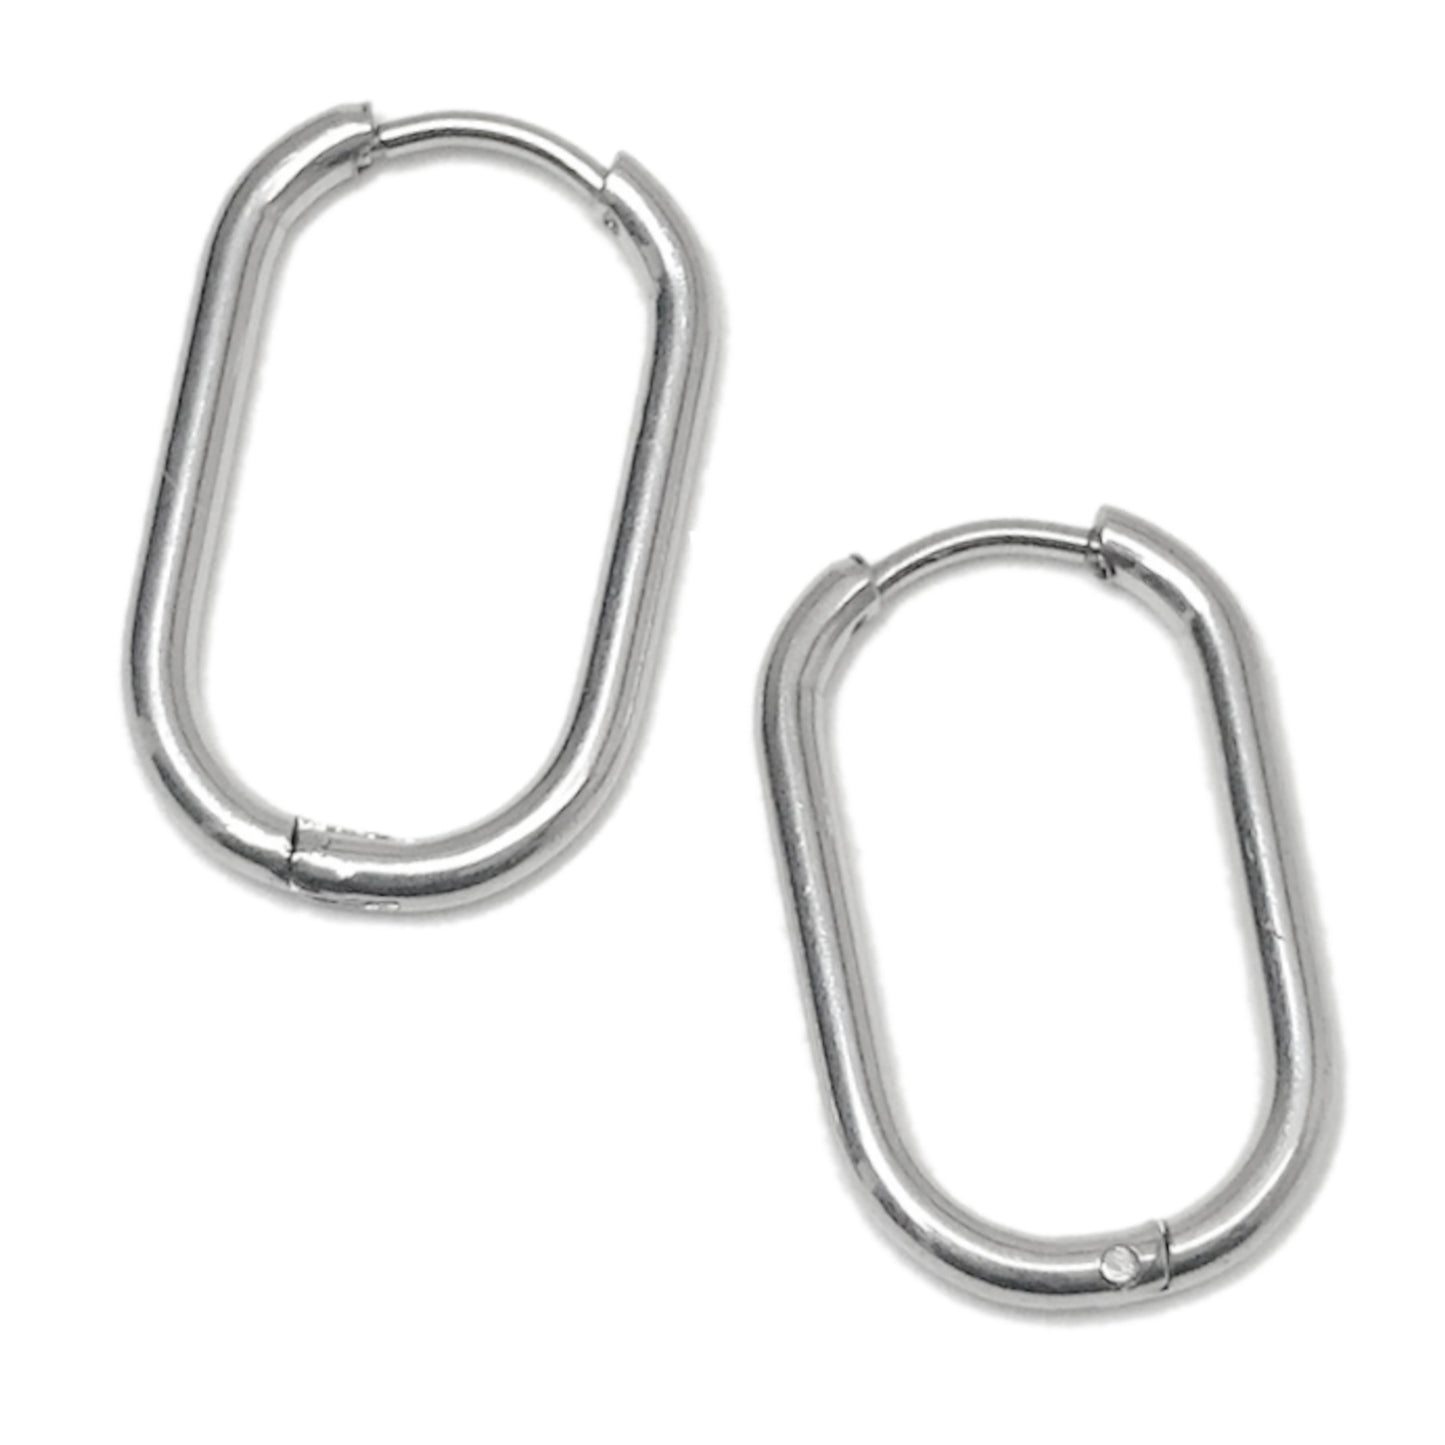 Small Stainless Steel Black Hinged Chain Link Huggie Earring